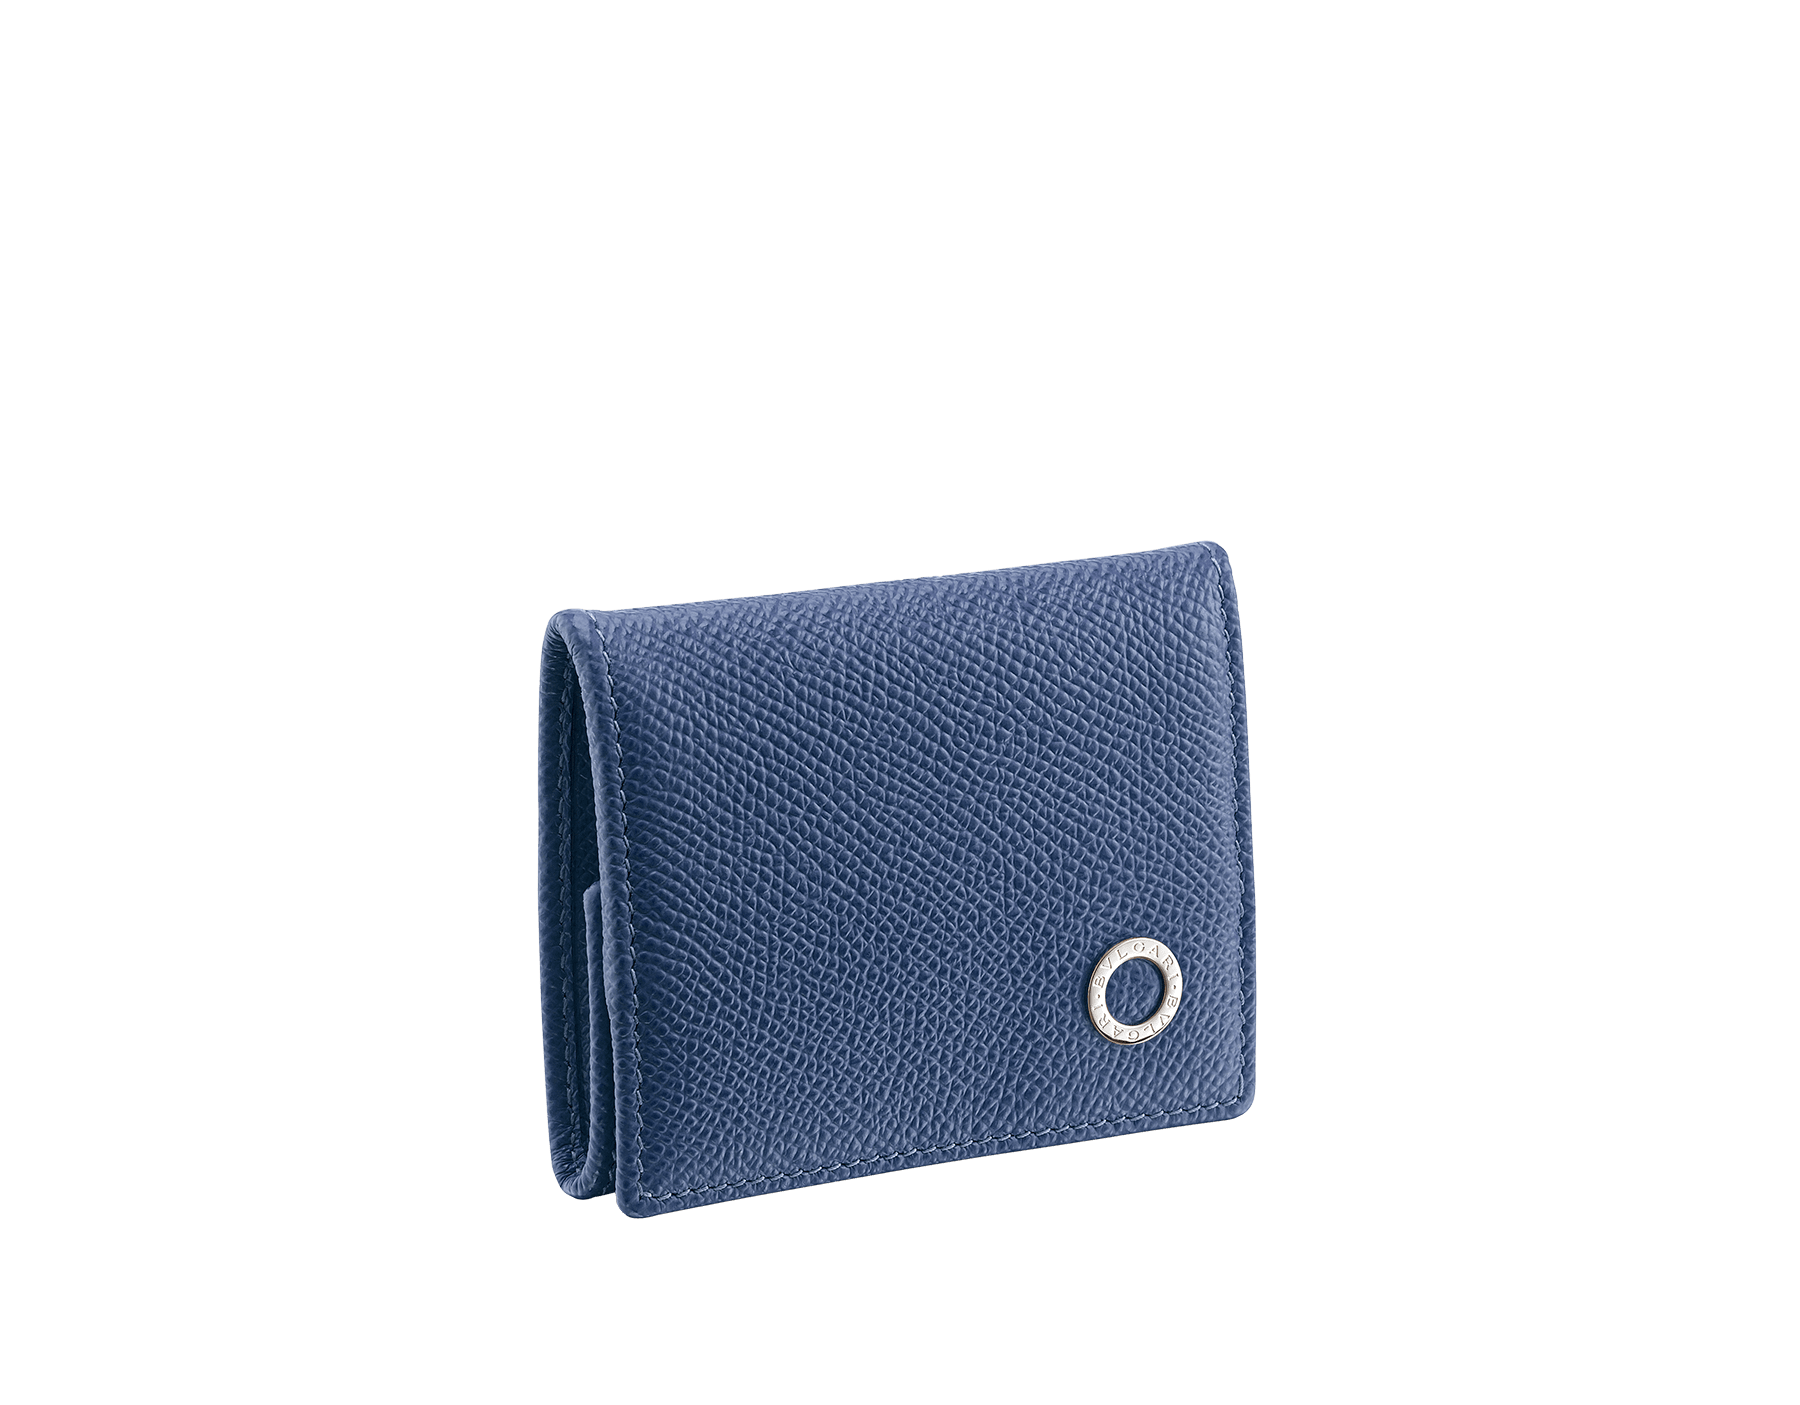 Coin holder in denim sapphire grain calf leather, with brass palladium plated hardware featuring the Bvlgari-Bvlgari motif. BBM-WLT-COIN image 1